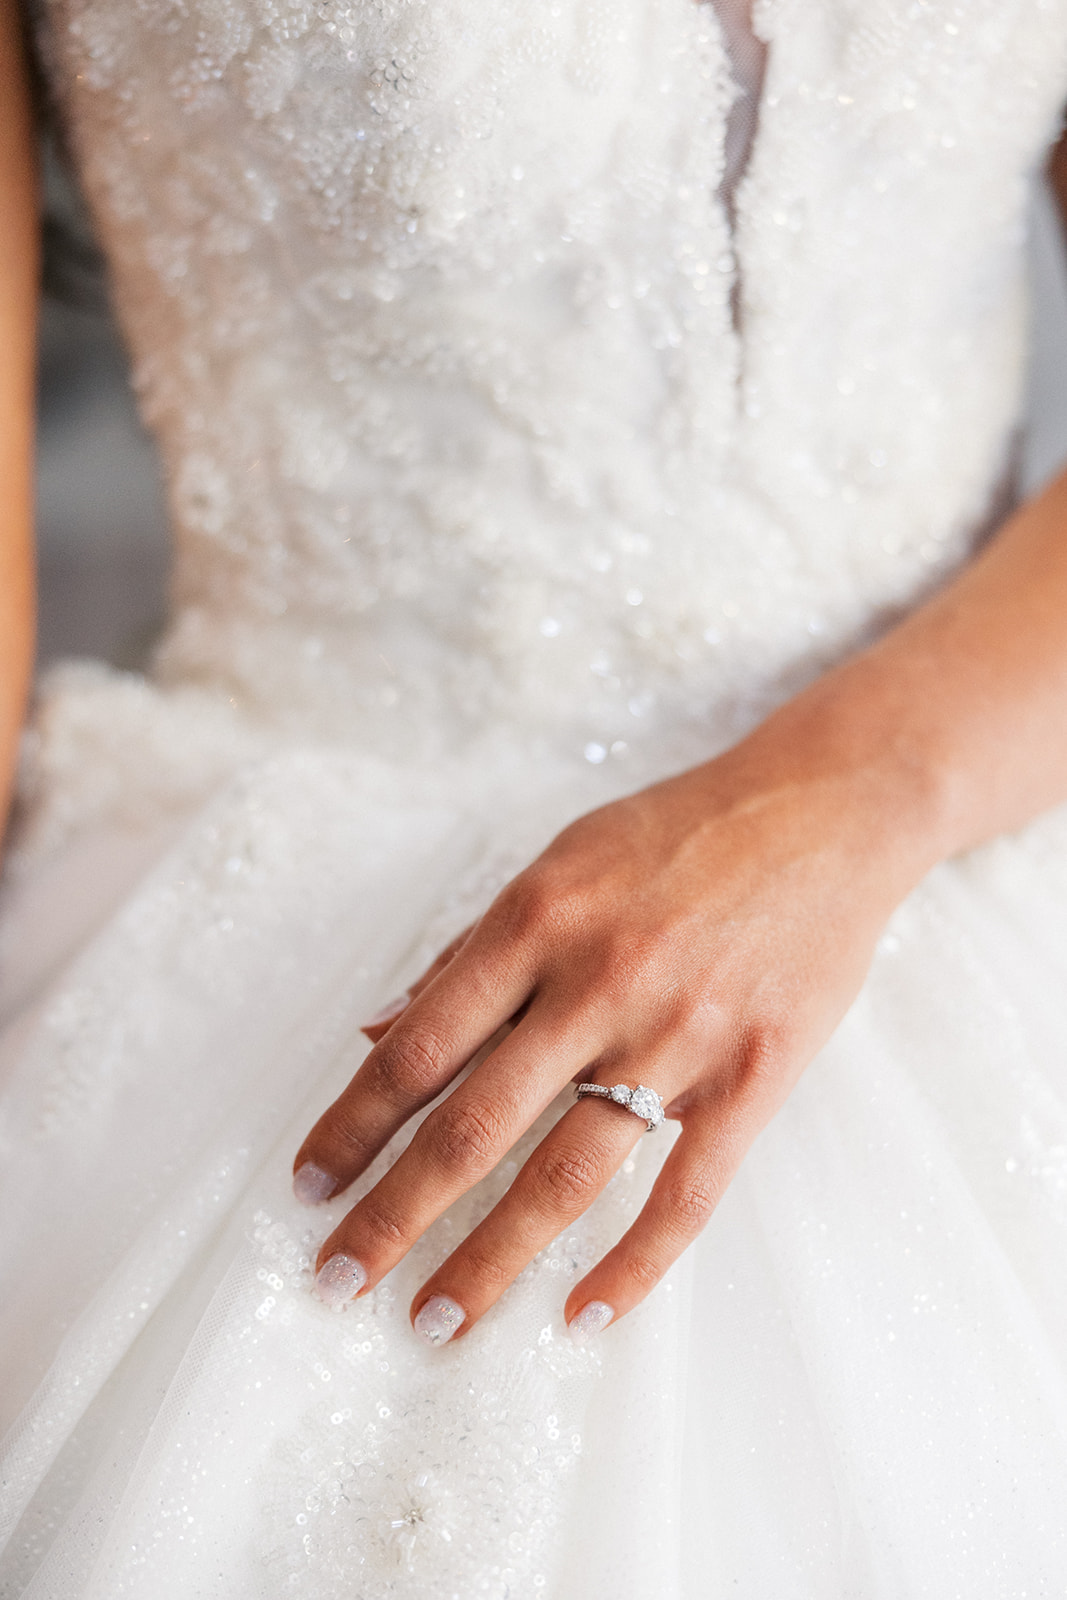 Details of a bride's hand with only her engagement ring on before the ceremony at a Park Avenue Club Wedding